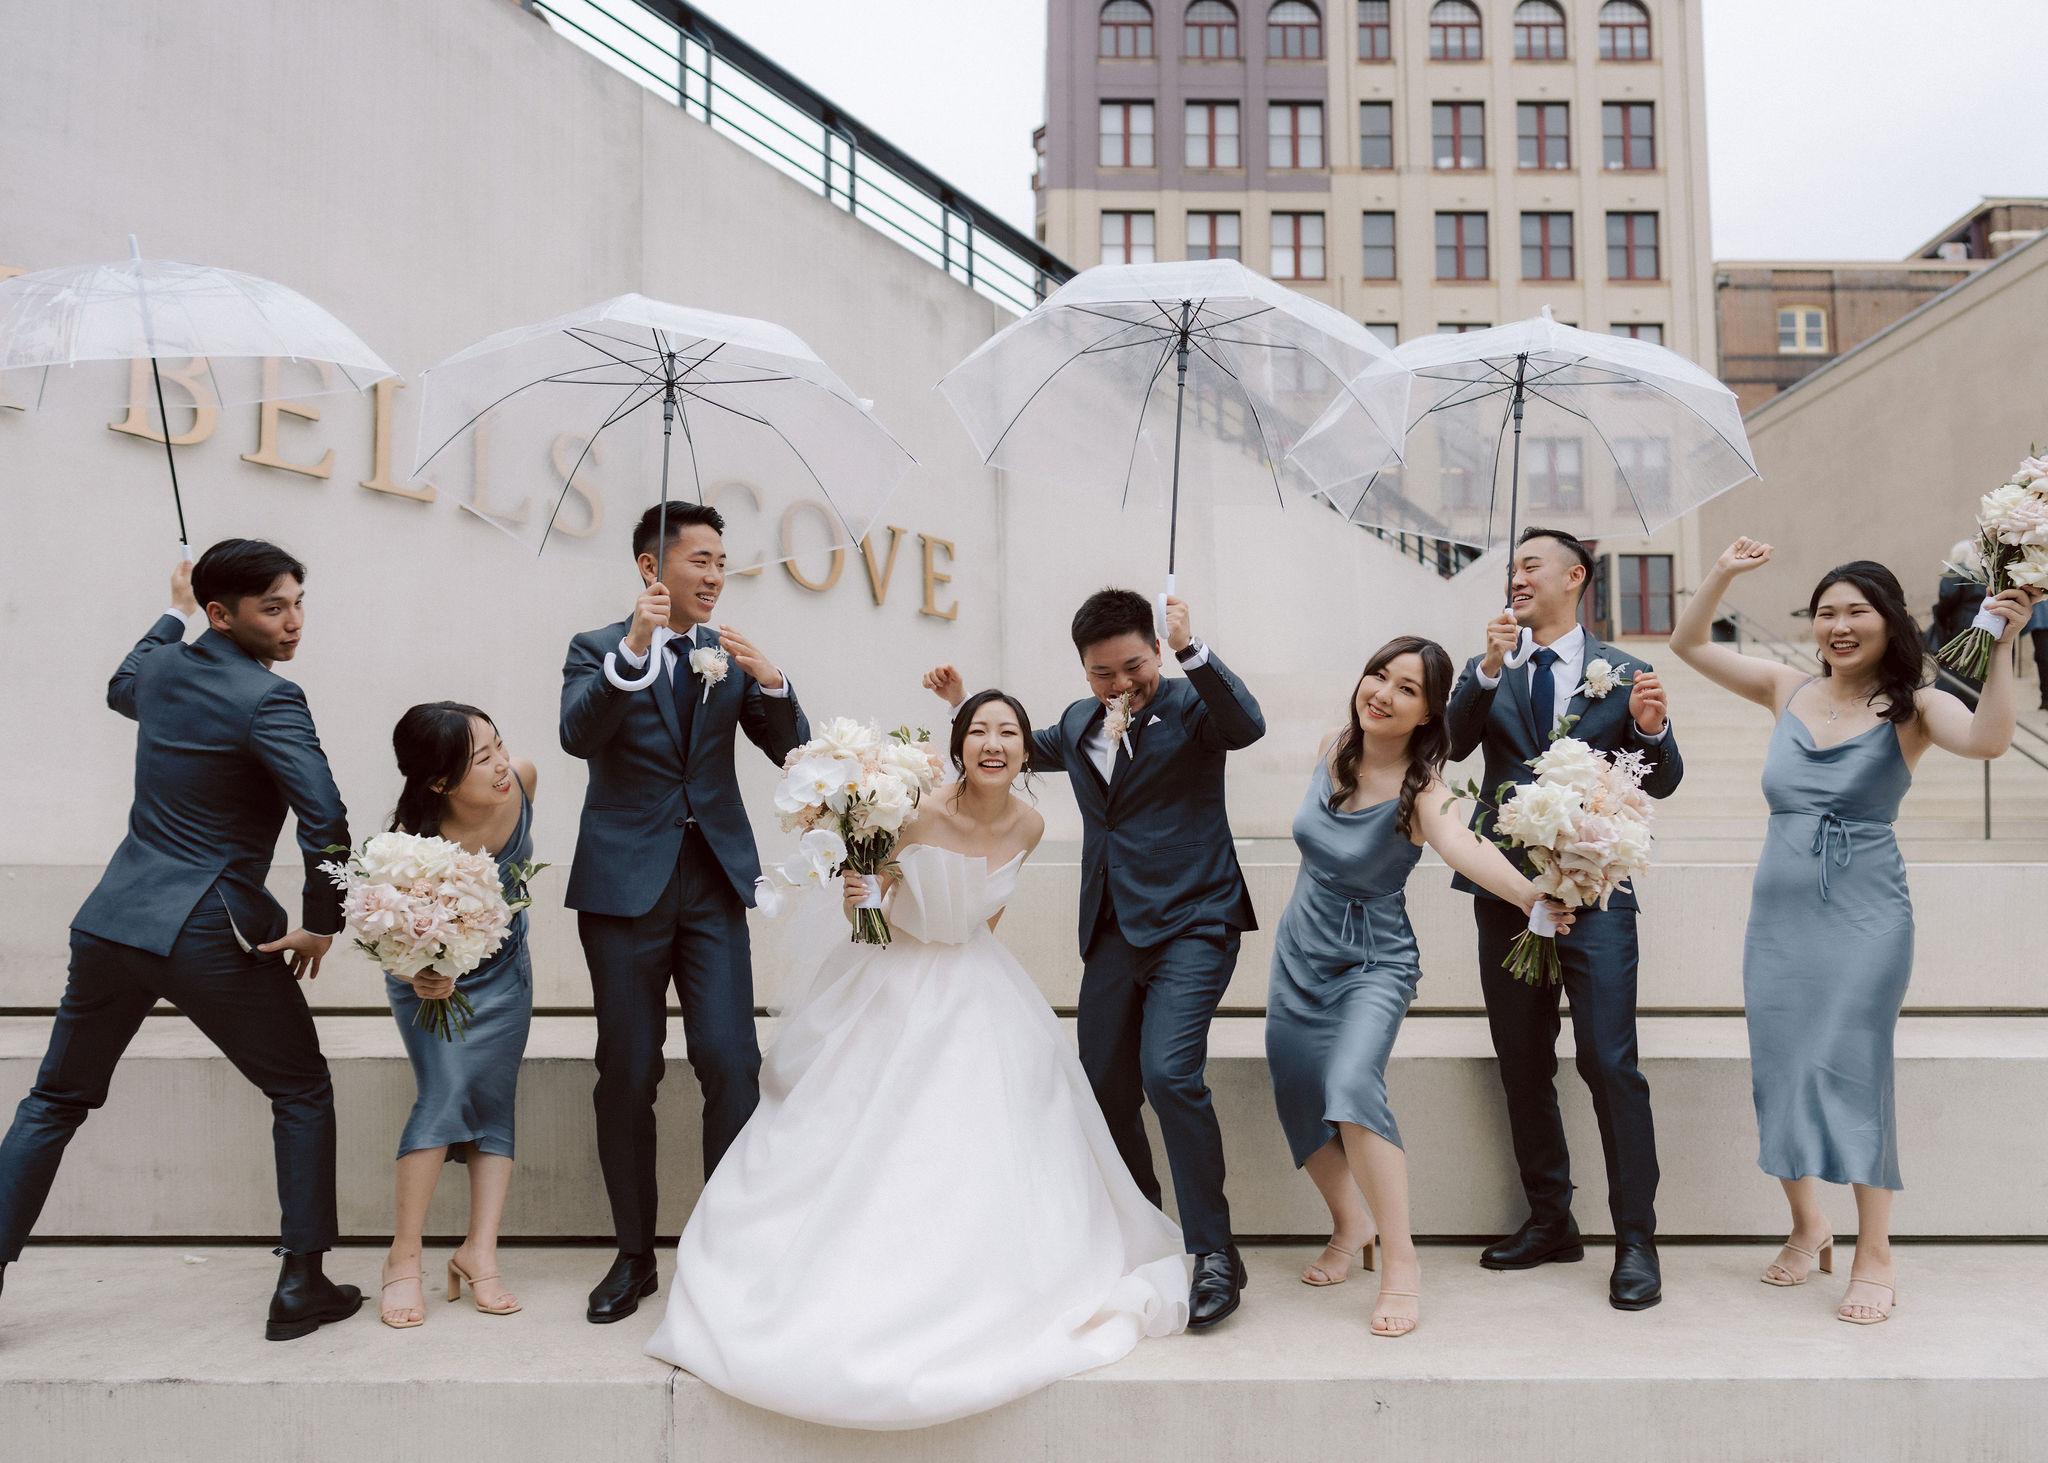 Blue Hues and Love’s Cues: Daniel and Lauren’s Wedding Day